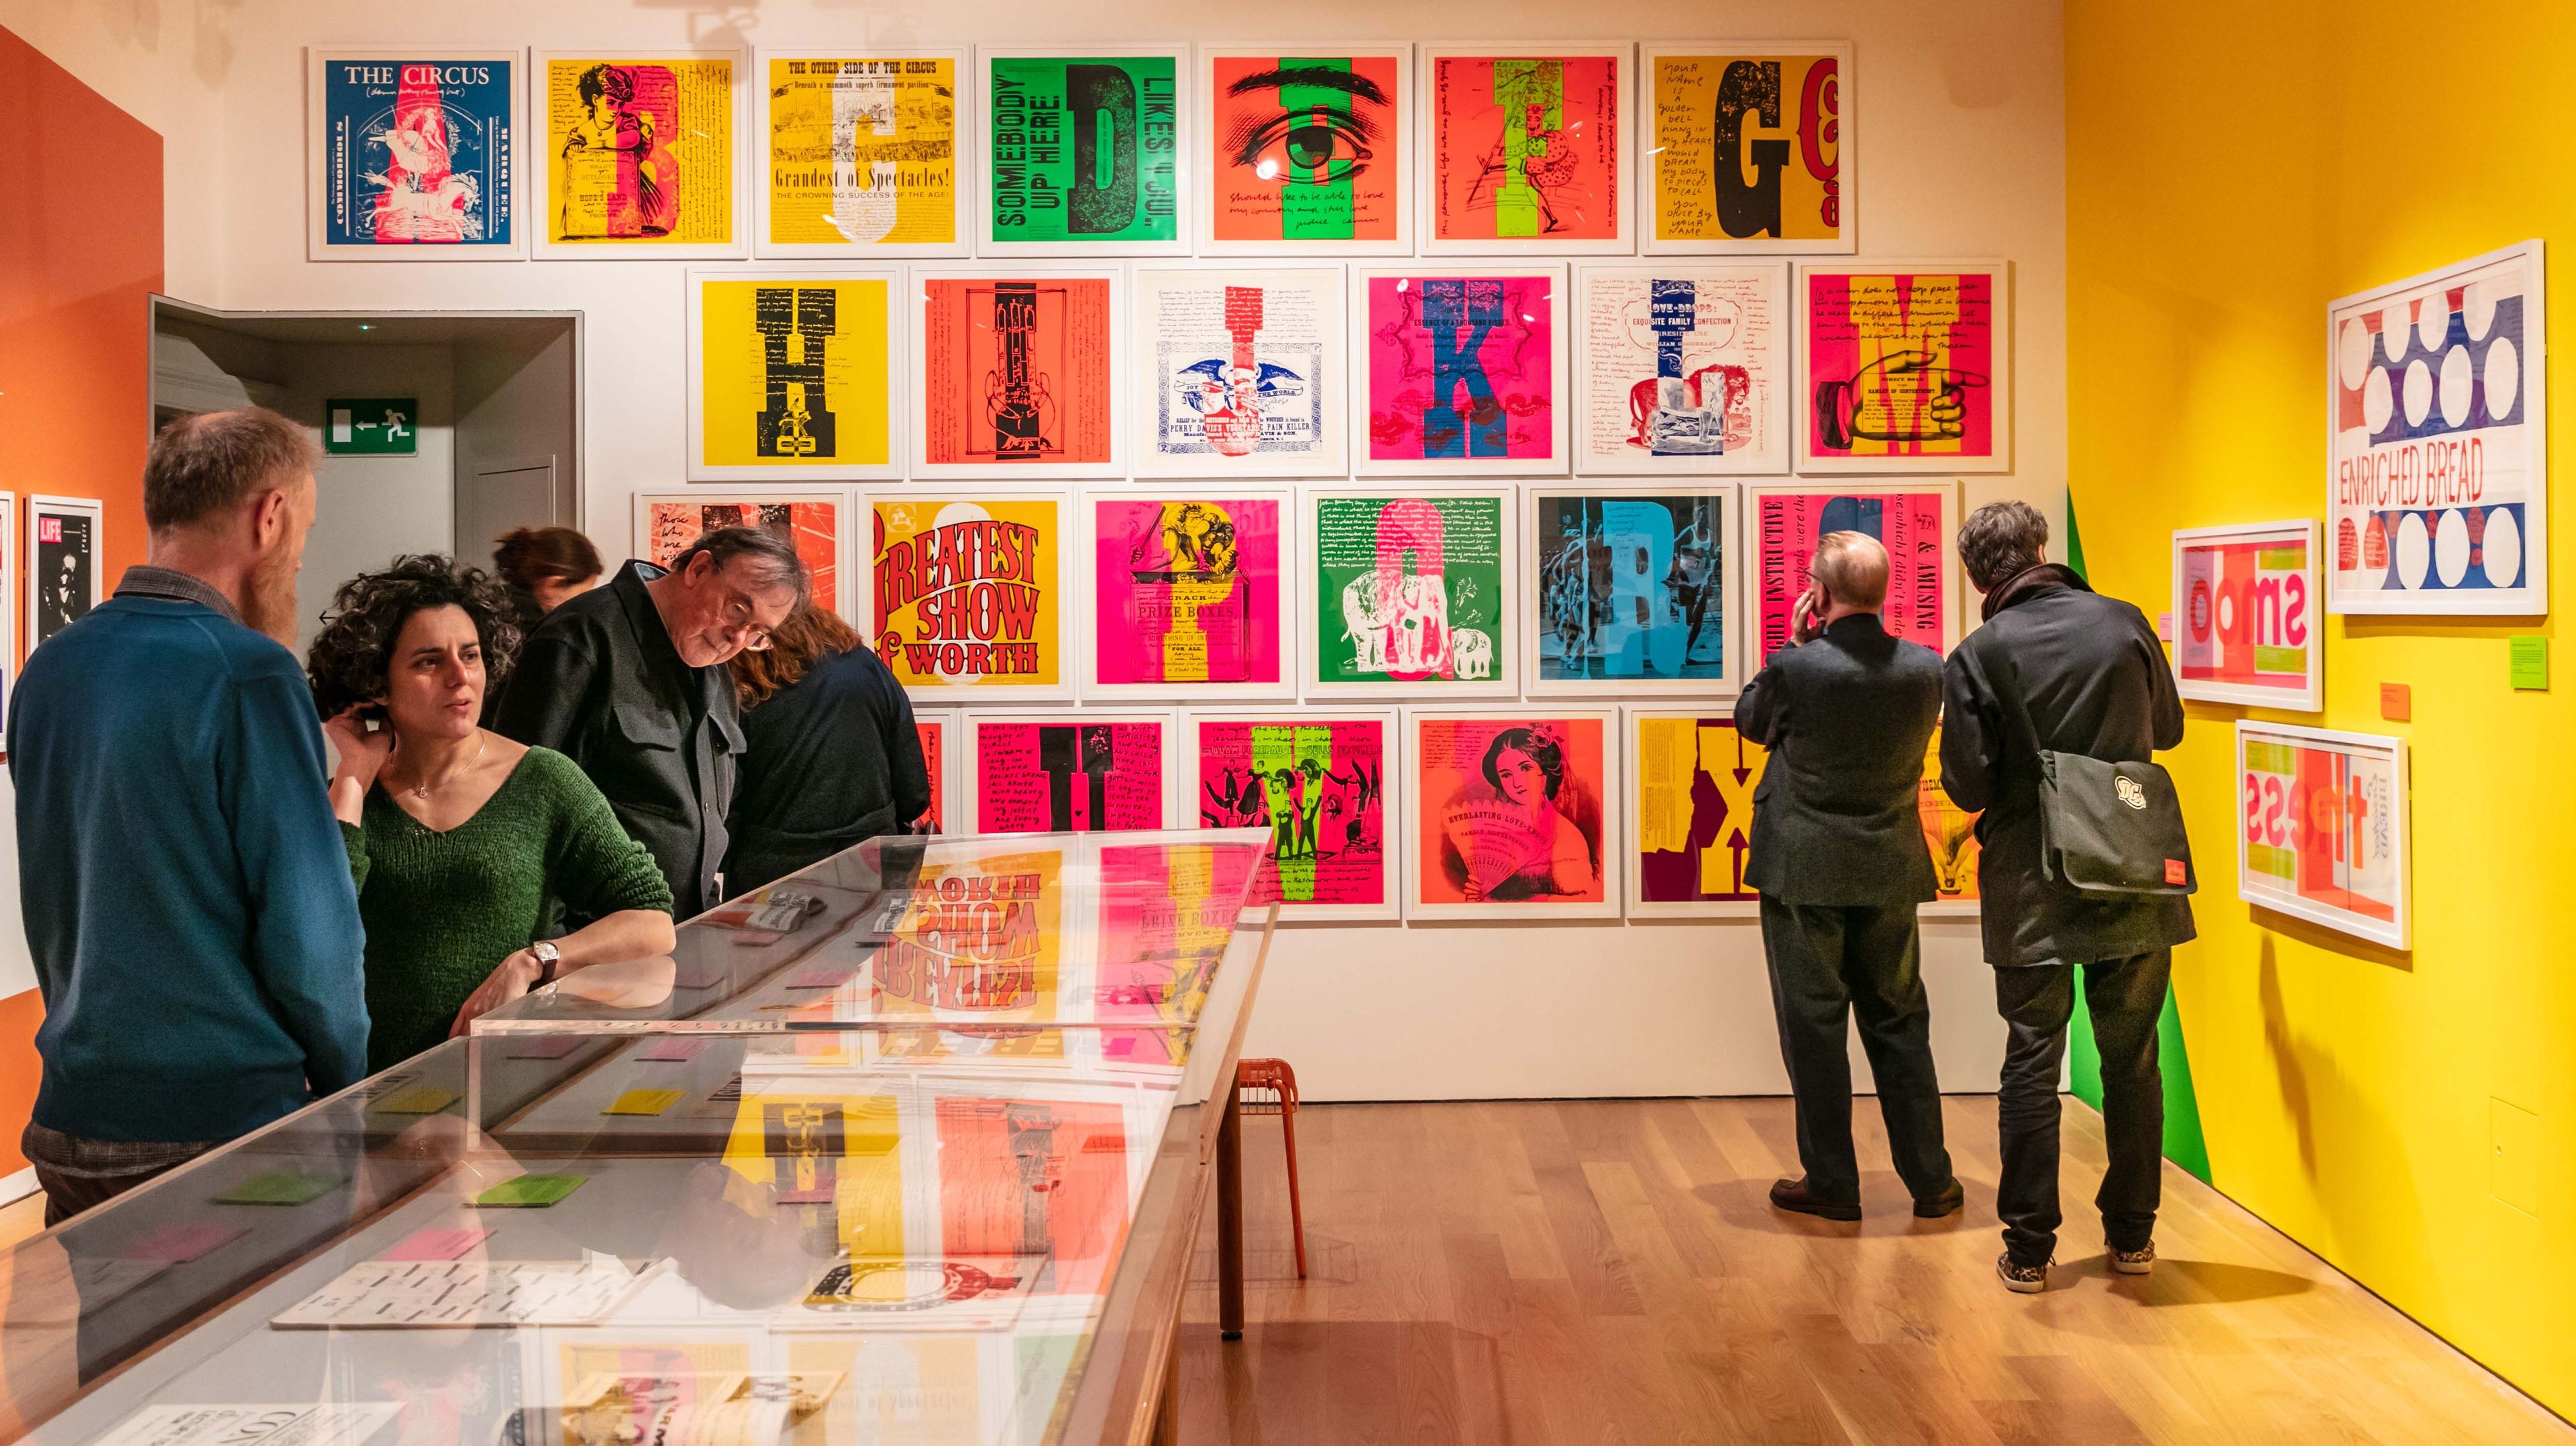 Photograph of the inside of a gallery with people looking at the illustrations on display